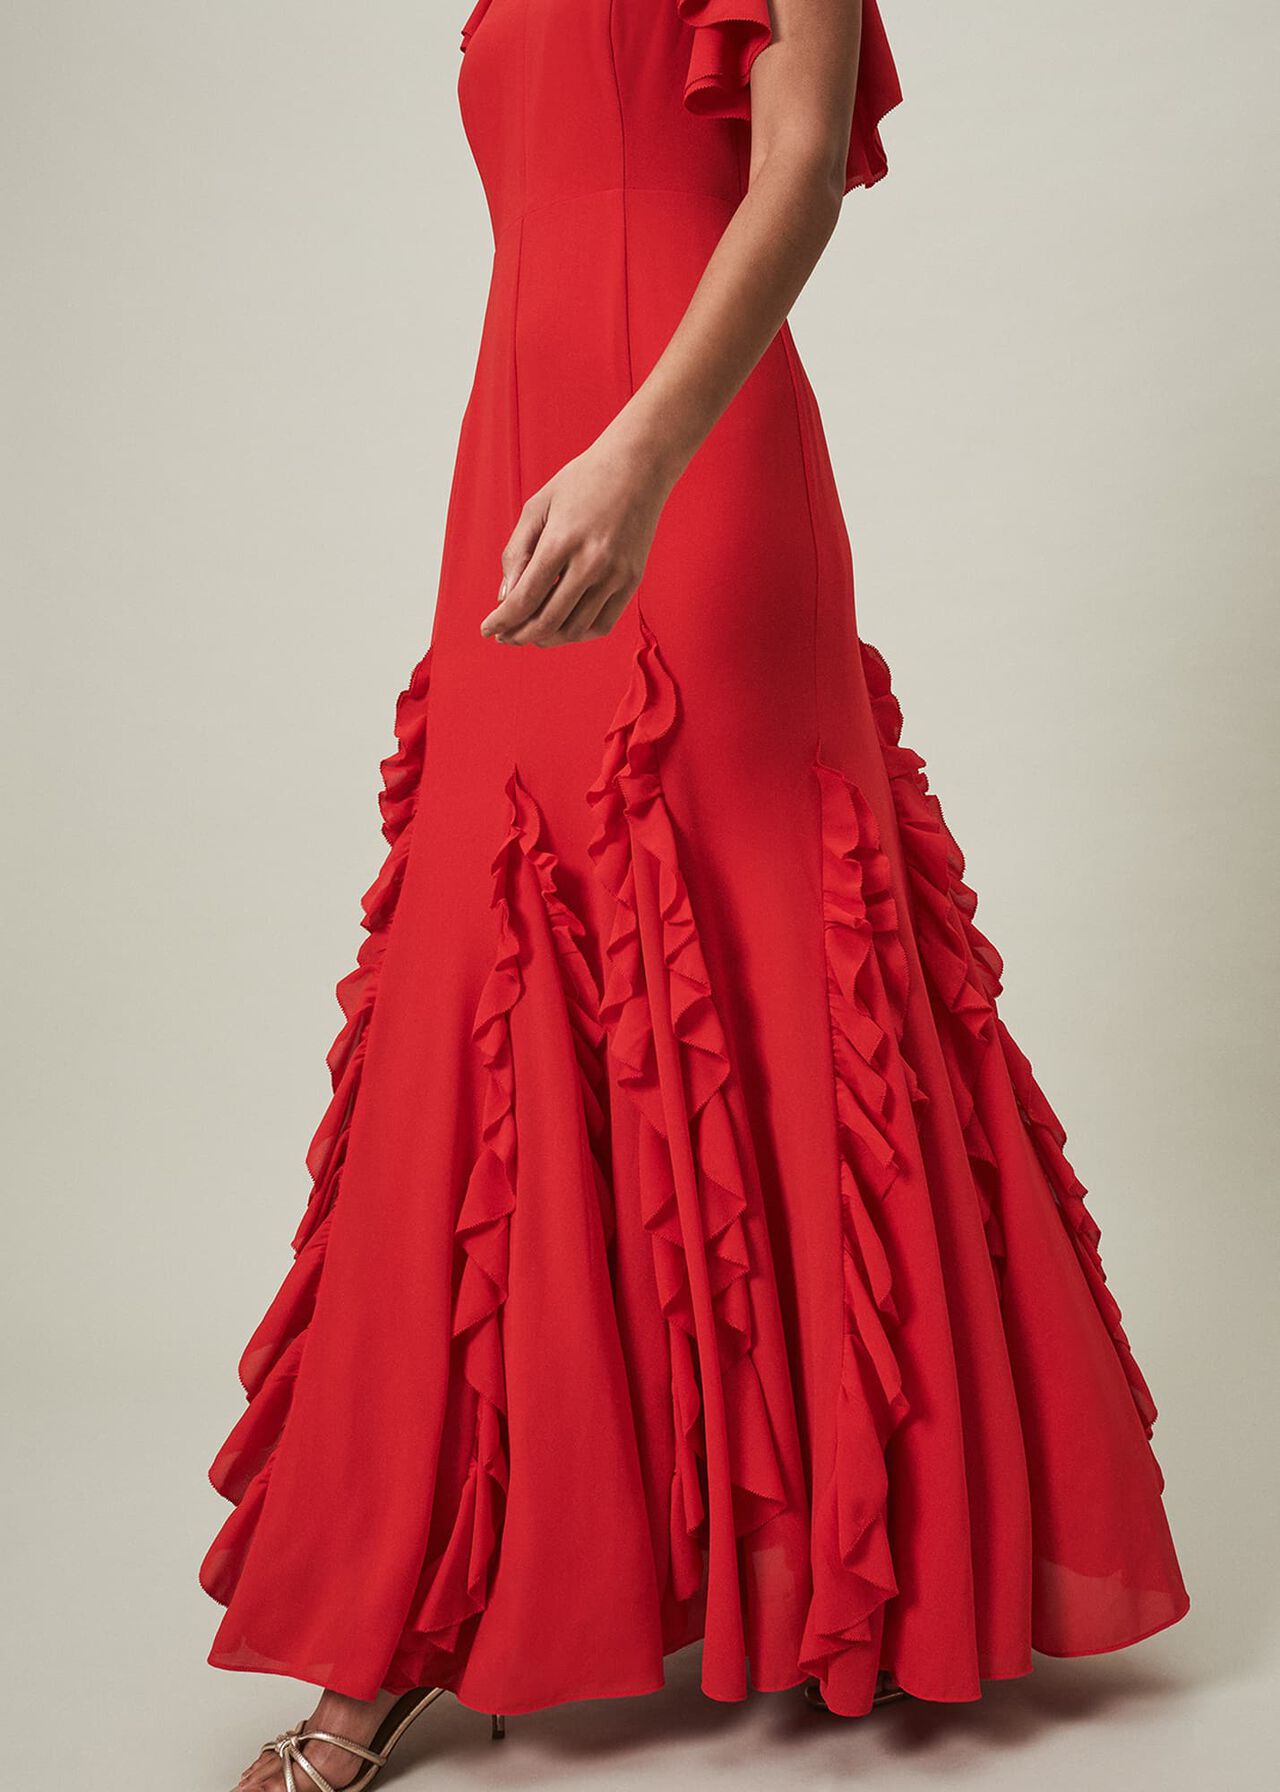 Scarlet Red Maxi Dress with Ruffled Sleeves & Skirt, Phase Eight